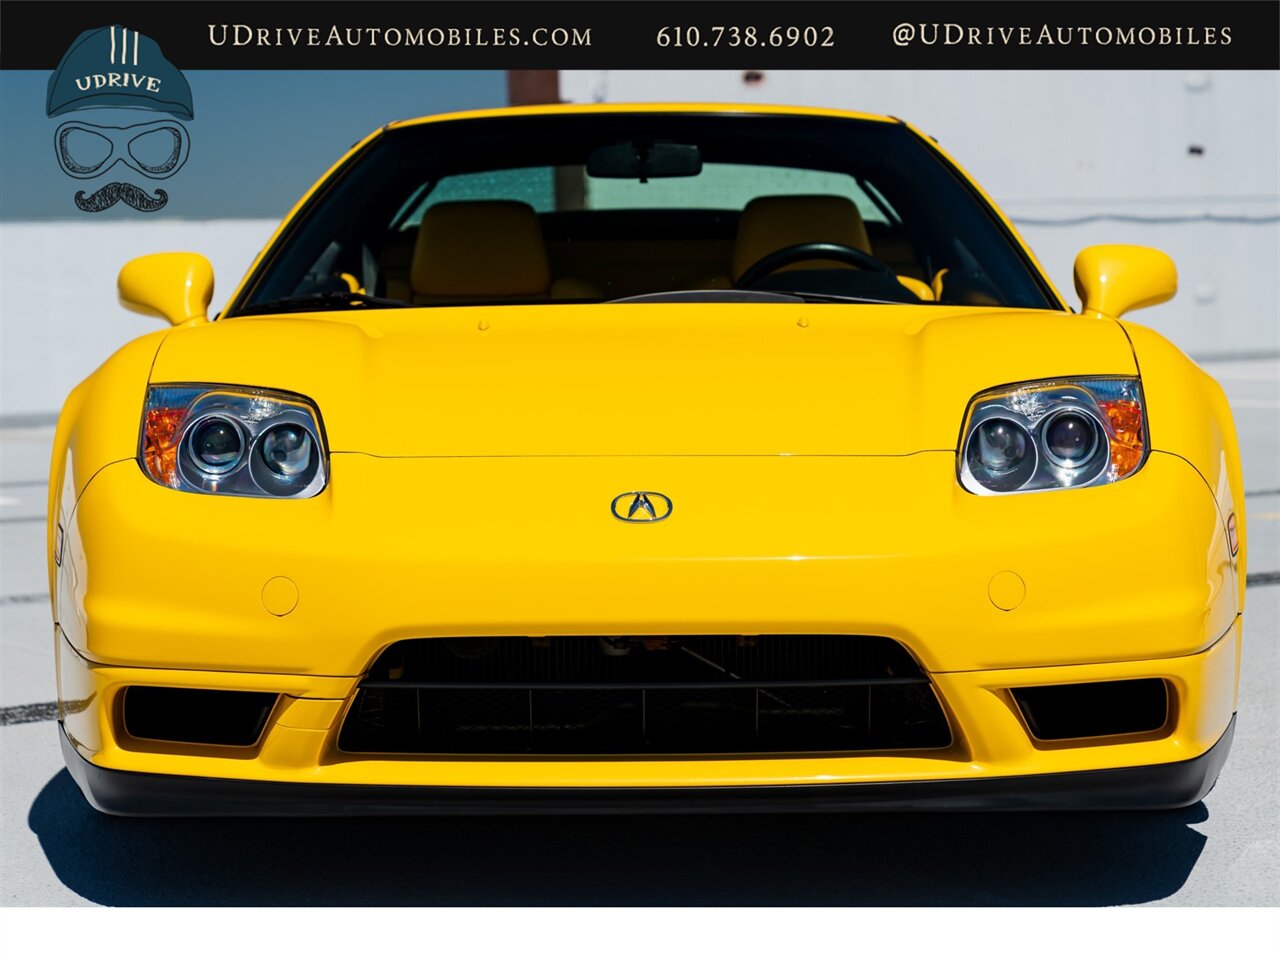 2003 Acura NSX NSX-T  Spa Yellow over Yellow Lthr 1 of 13 Produced - Photo 13 - West Chester, PA 19382